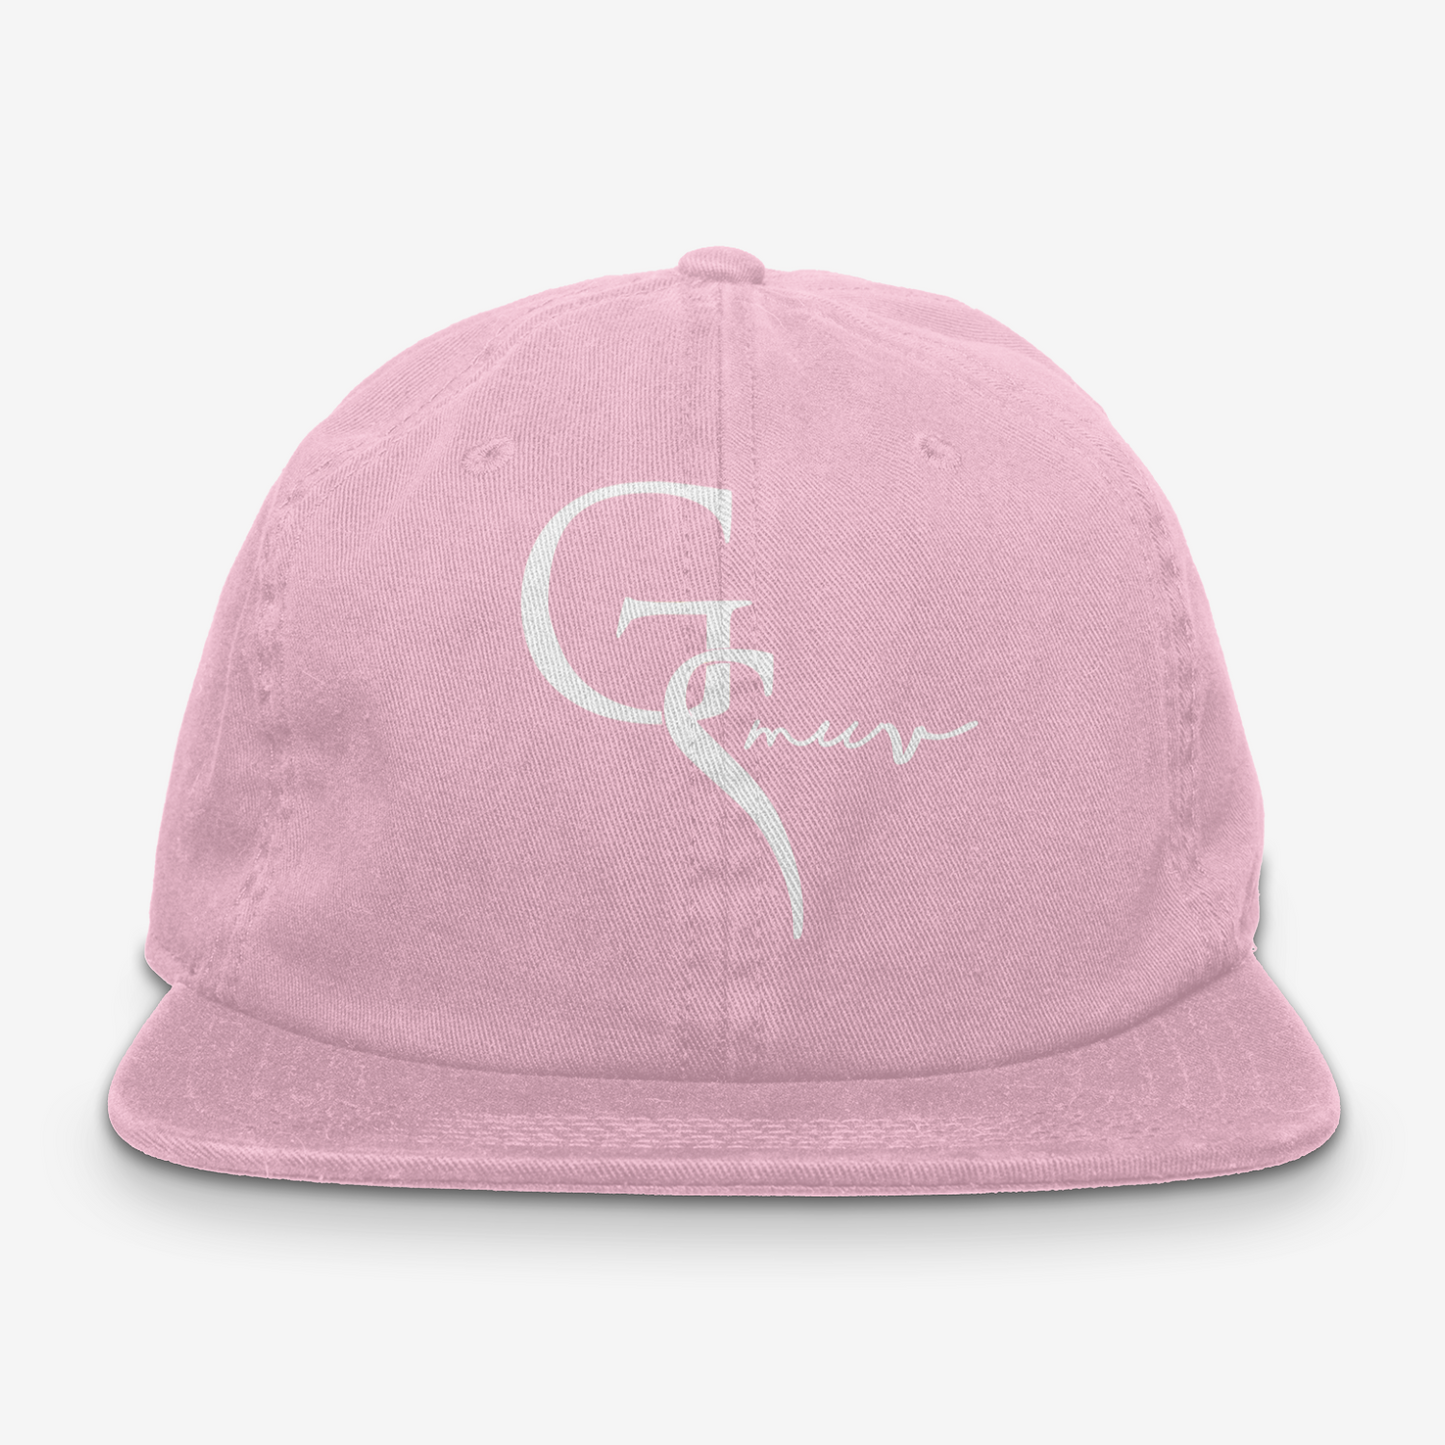 Gsmuv Dad Hats | Comfortable Fun Gift " Uncle Mac" Dads Hat for Men